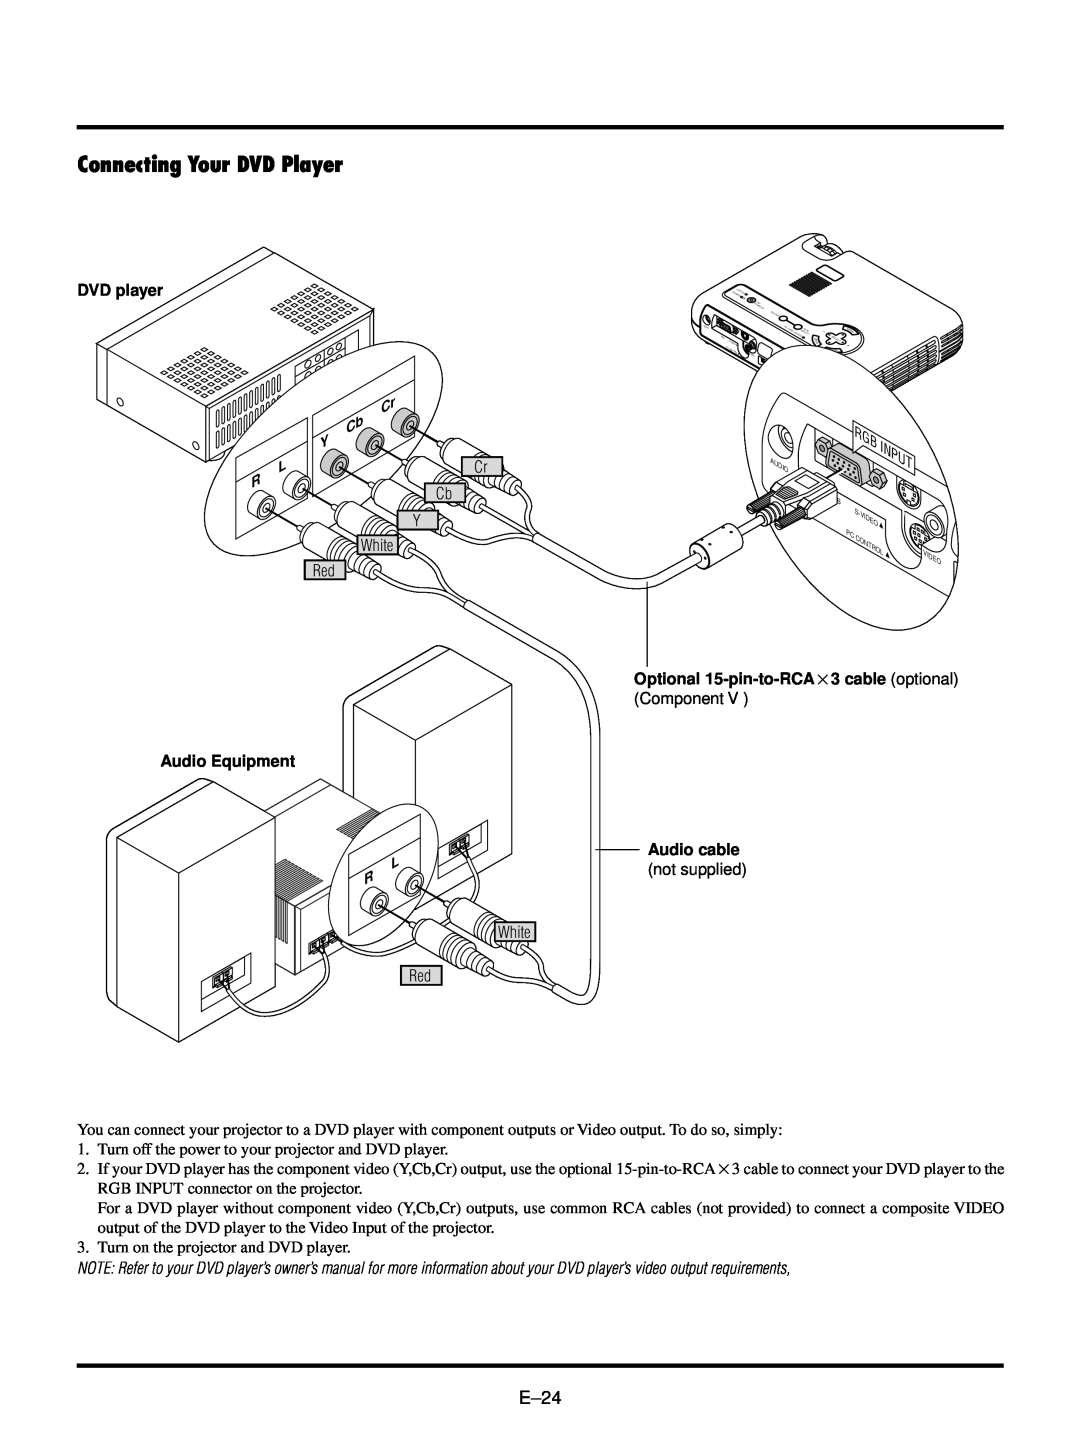 NEC LT150/LT85 user manual Connecting Your DVD Player, E–24 